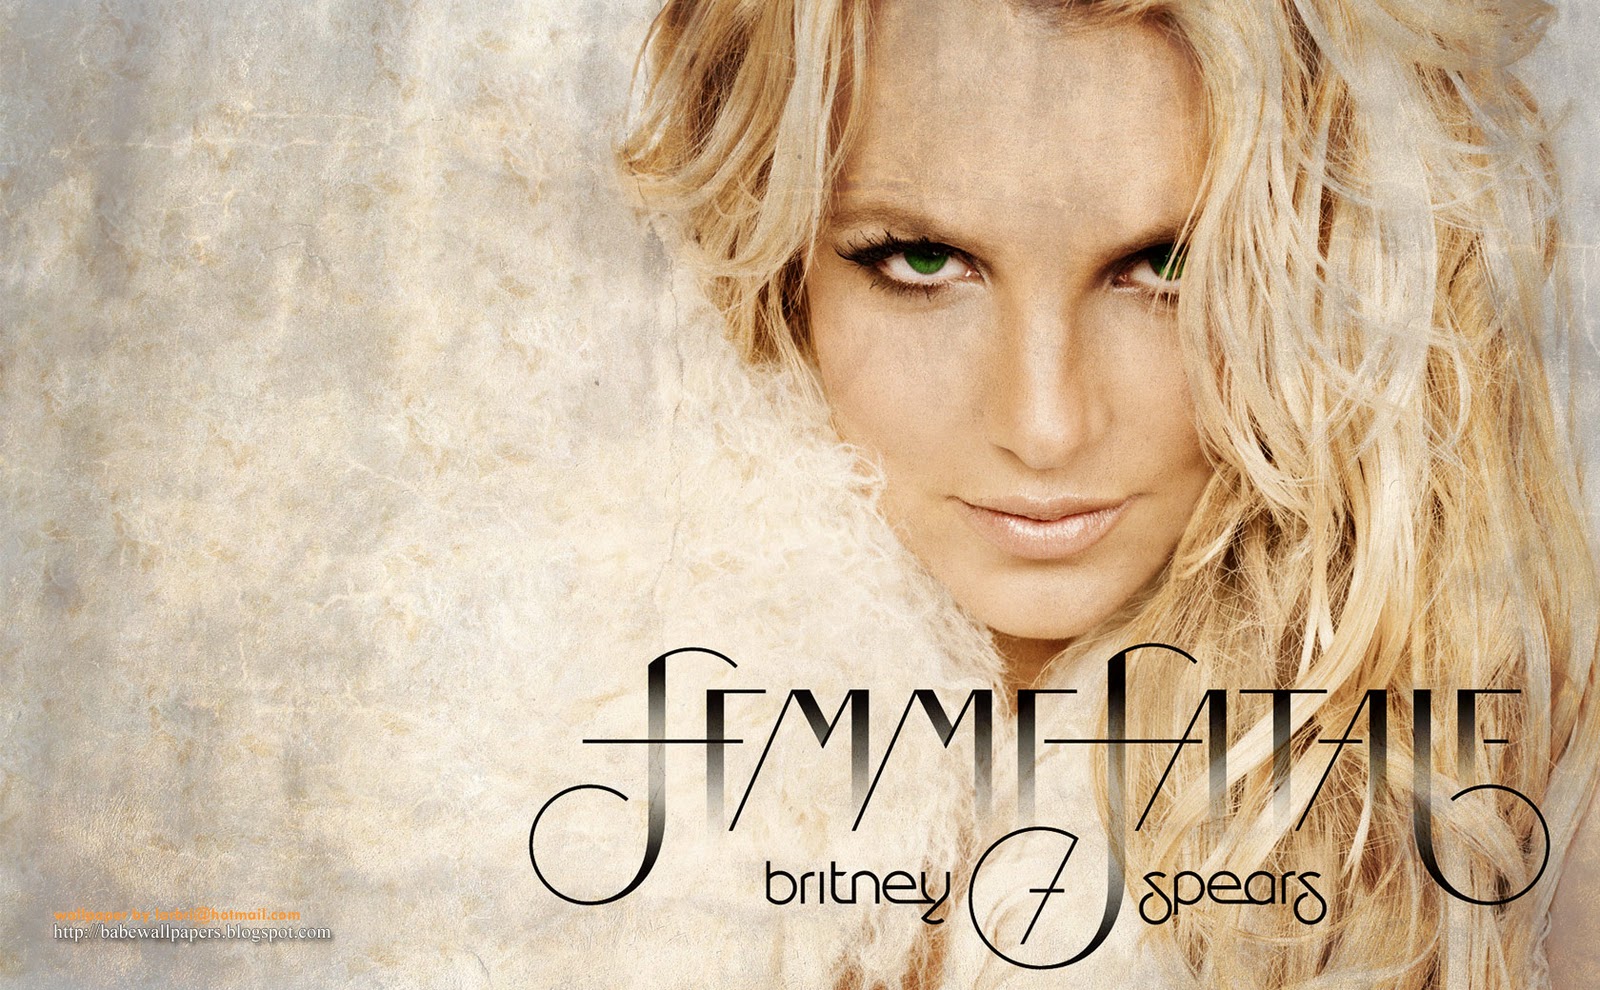 Babe wallpapers: Britney Spears - Femme Fatale Wallpapers